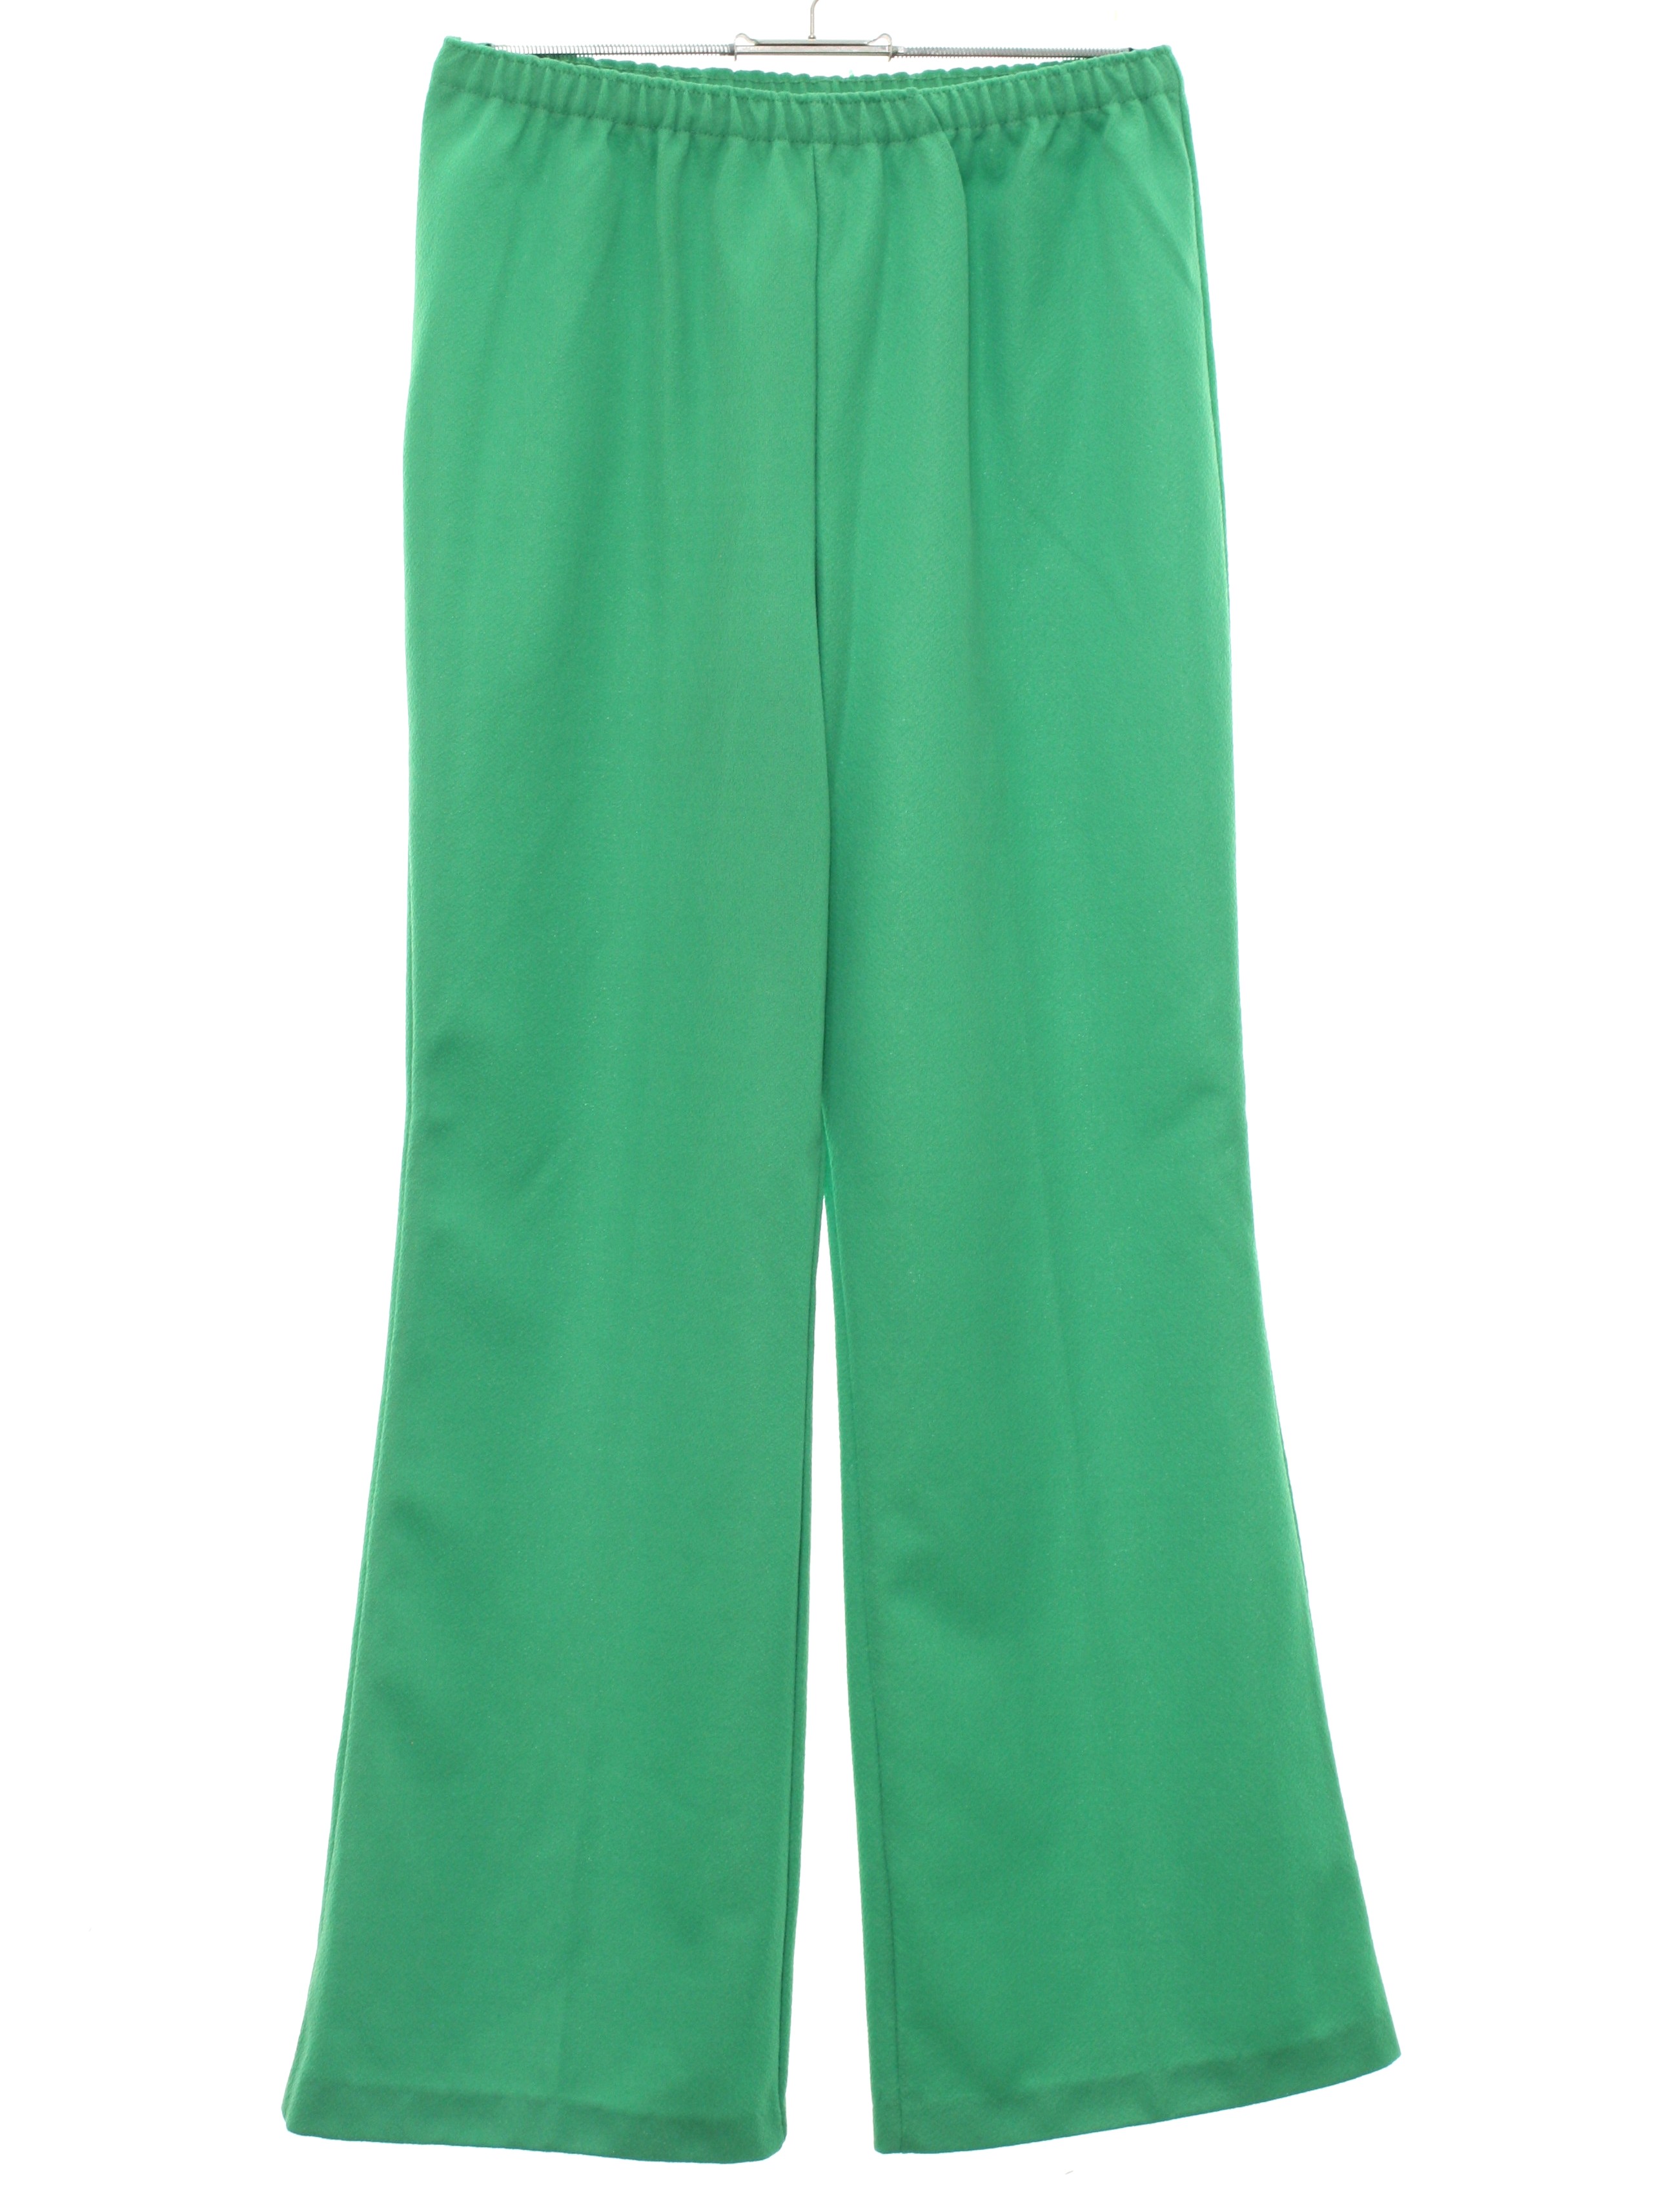 1970's Retro Flared Pants / Flares: 70s -size label- Womens grass green ...